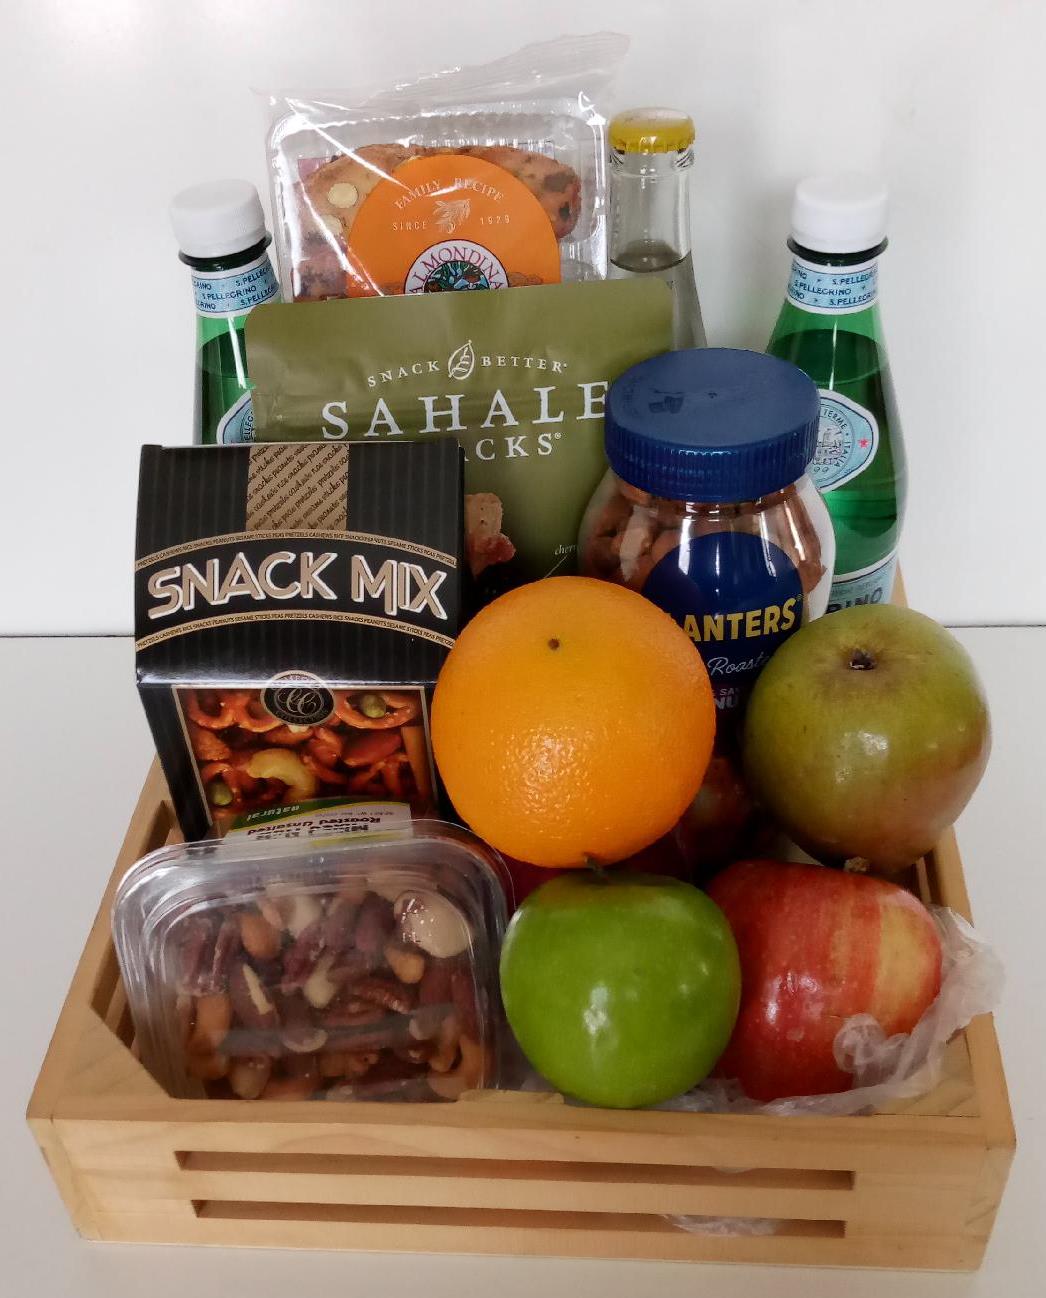 A fruit and snacks gift basket packed with an assortment of fresh fruits, nuts, snack mix, sparkling water and more gourmet snacks.